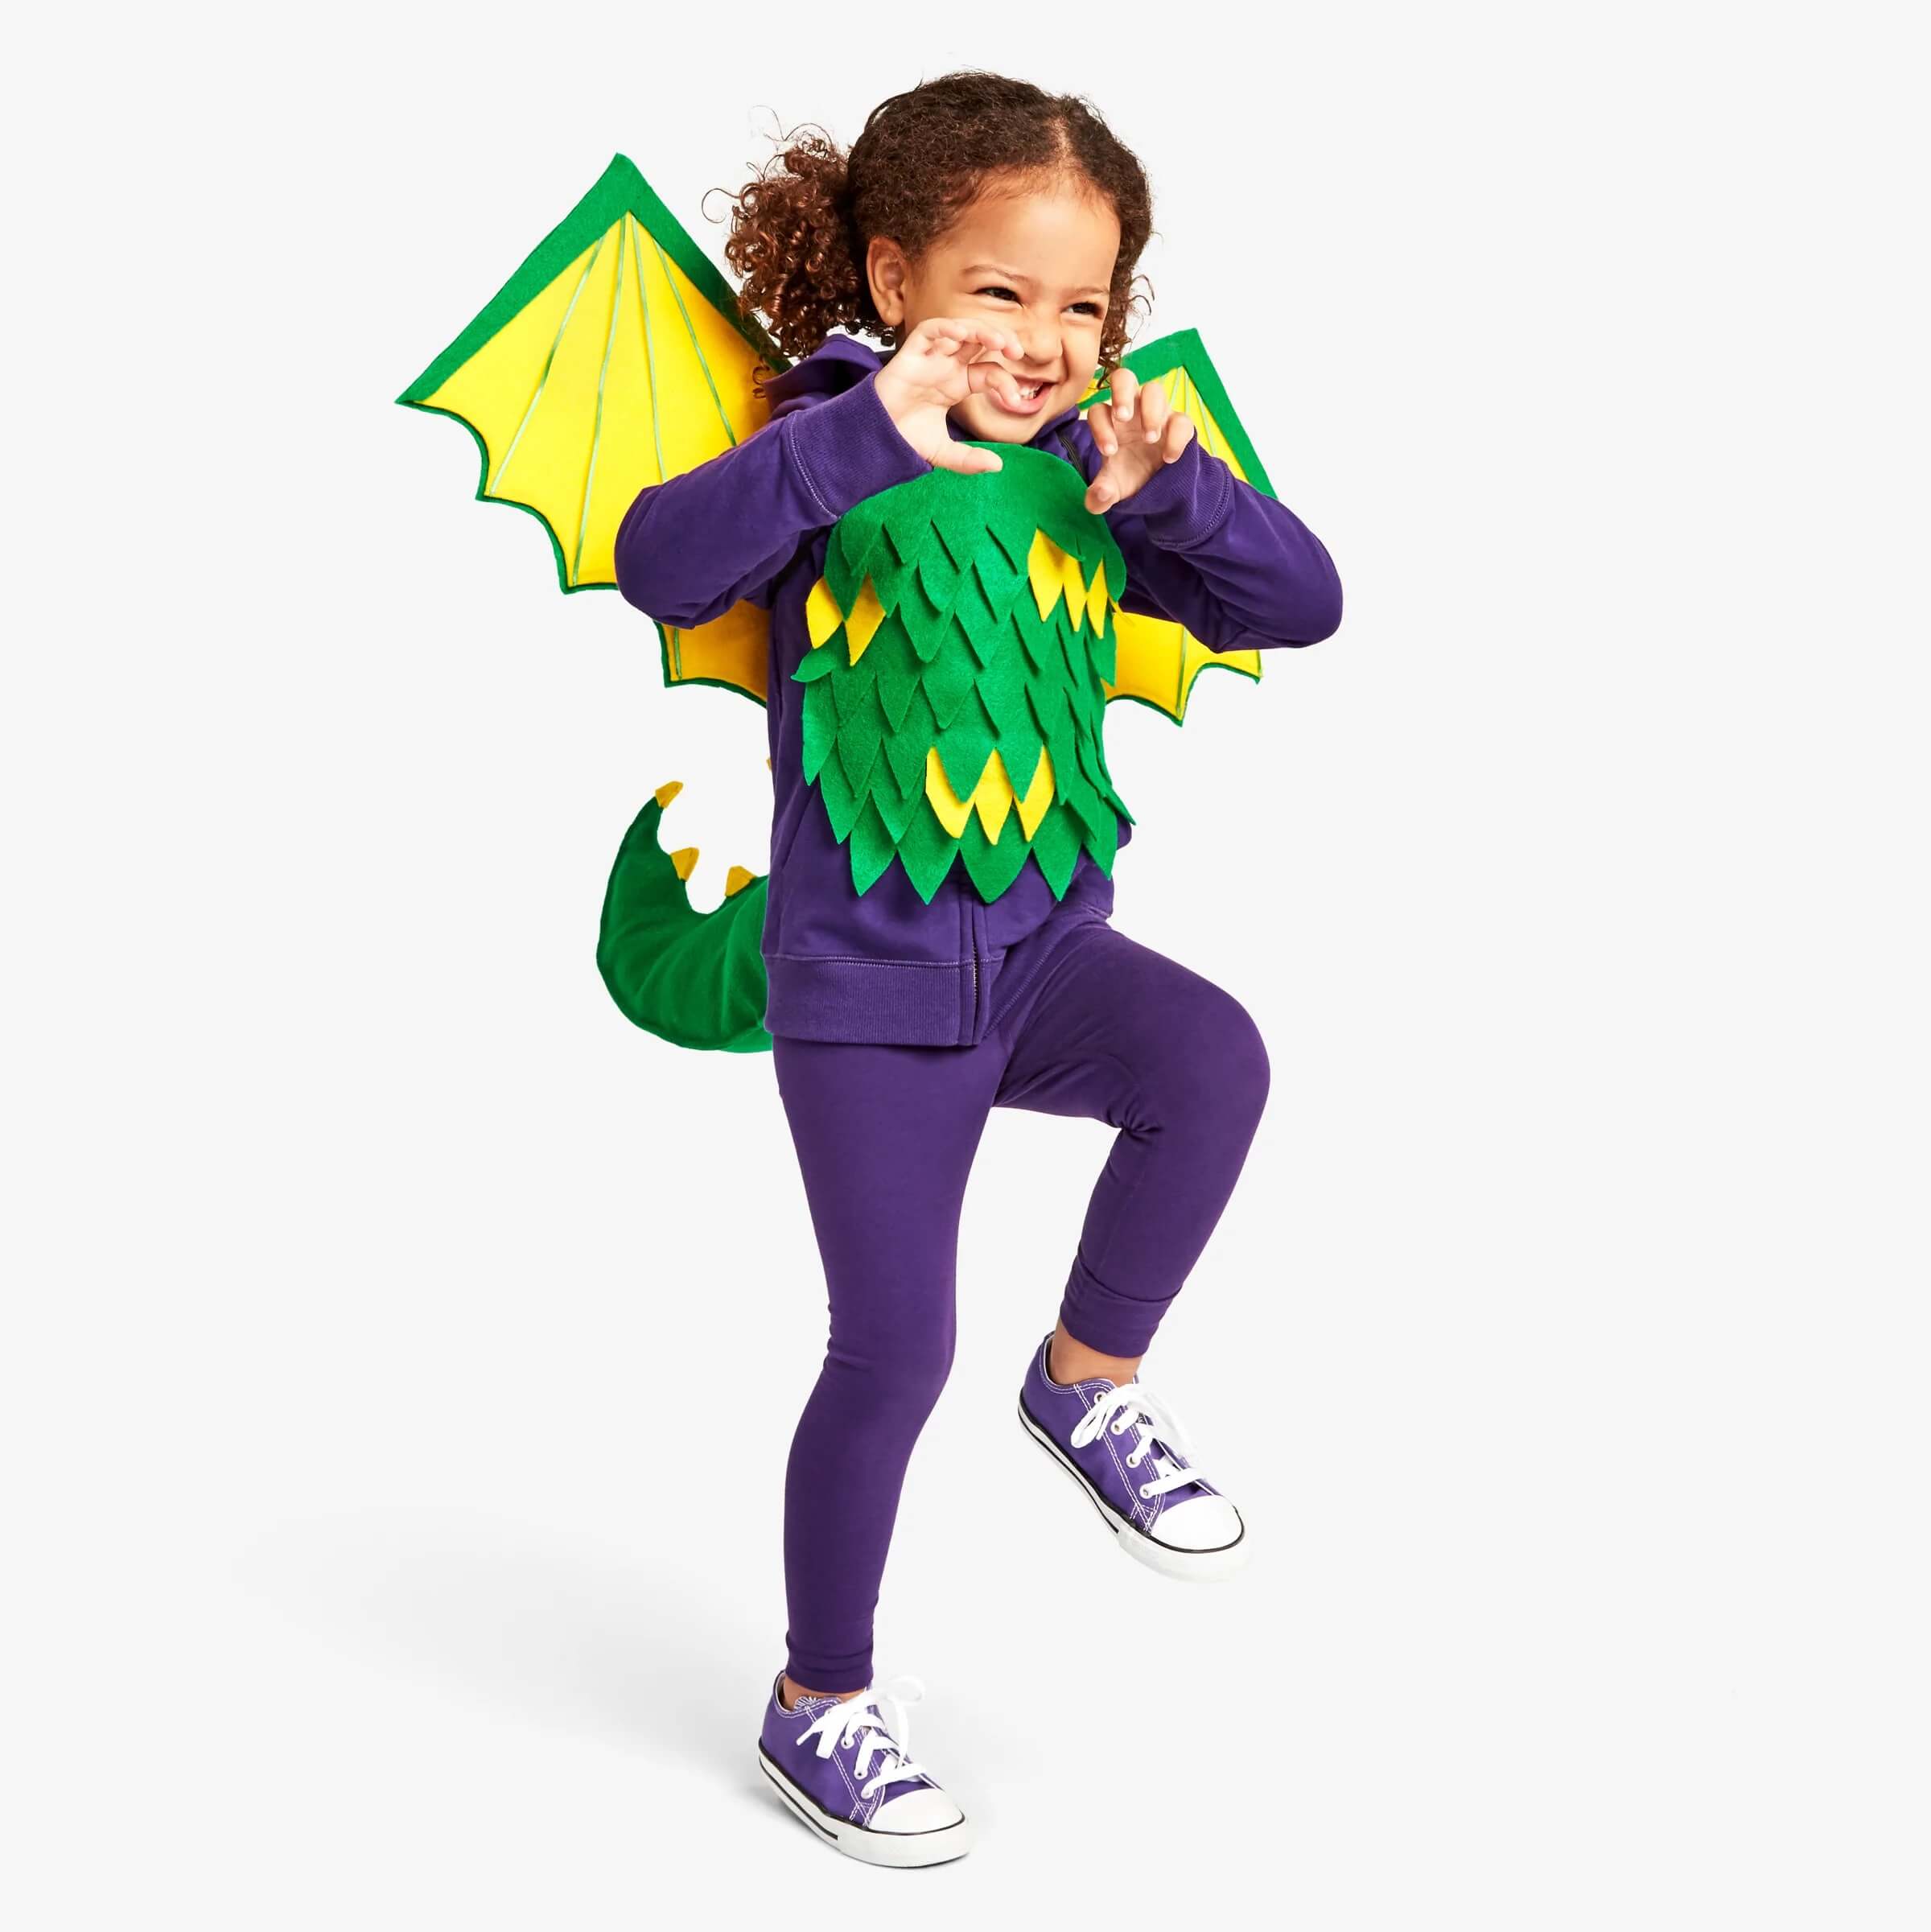 DIY Dragon Costume Made With Purple Outfit, Green, Yellow Felt, Green Ribbon, Cardboard, Elastic Band & Stuffing - Creating a Dragon Costume in the domestic setting 